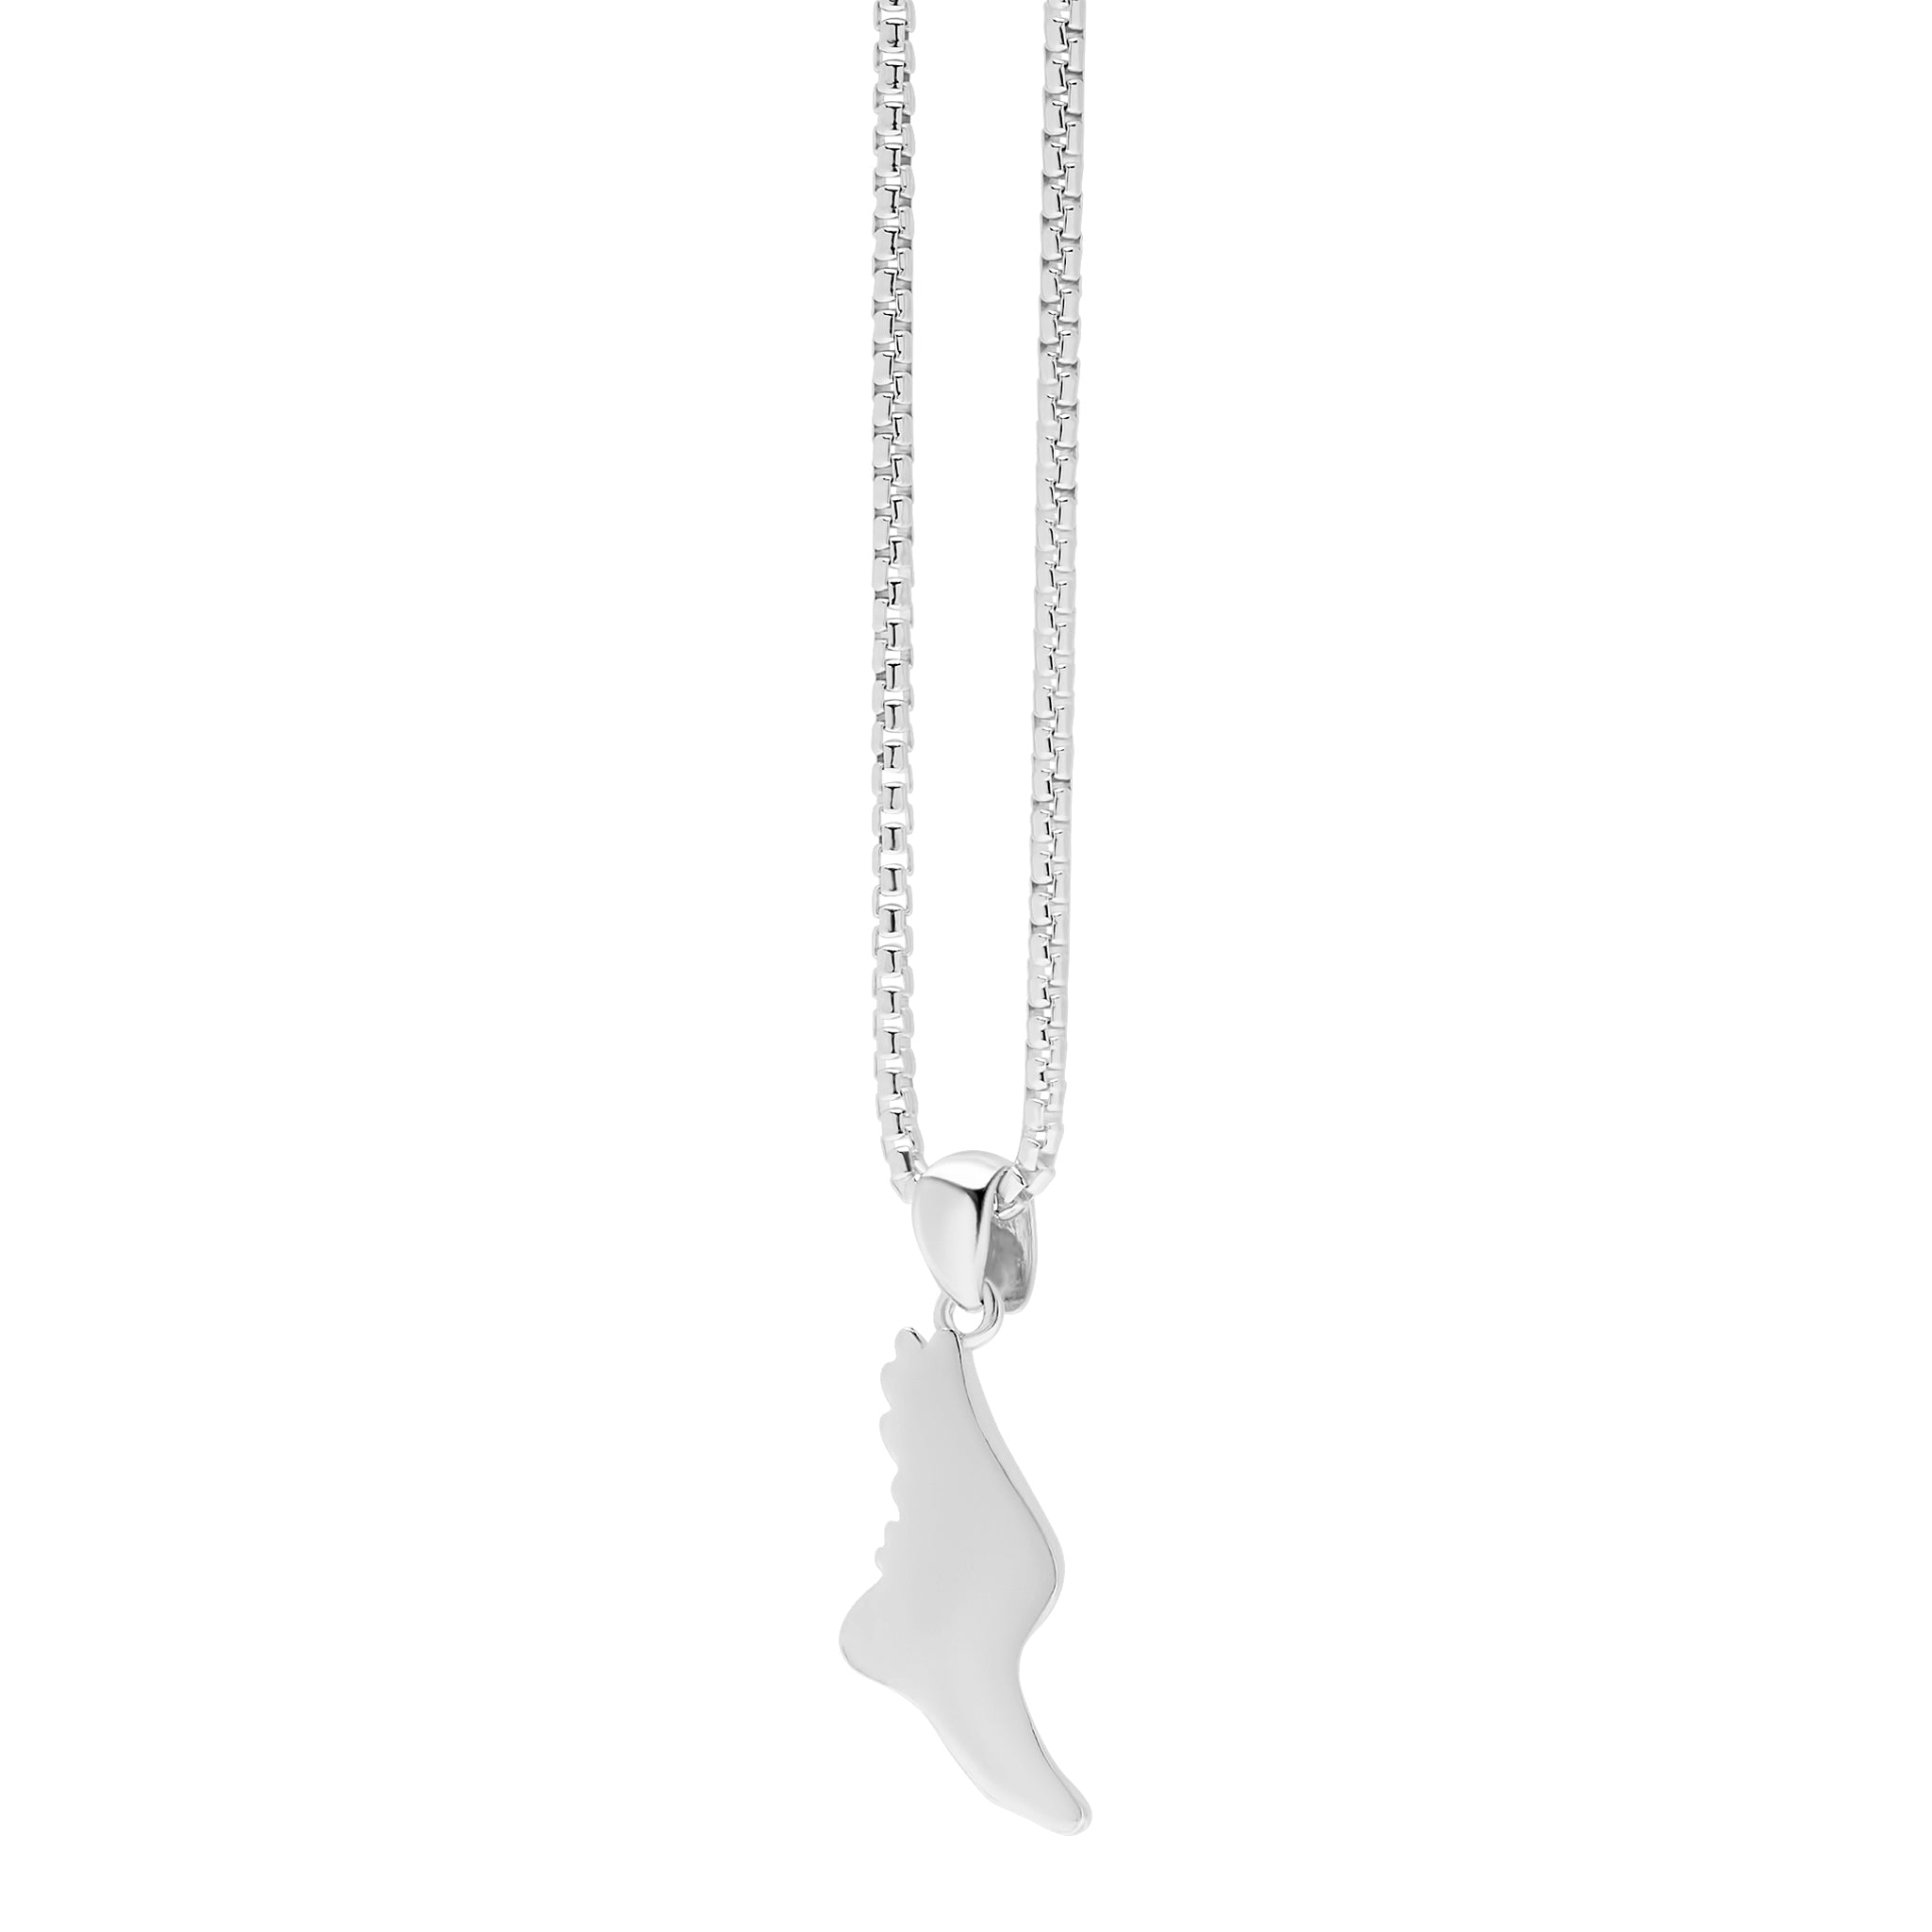 Winged Foot Pendant + Chain - Minted New York